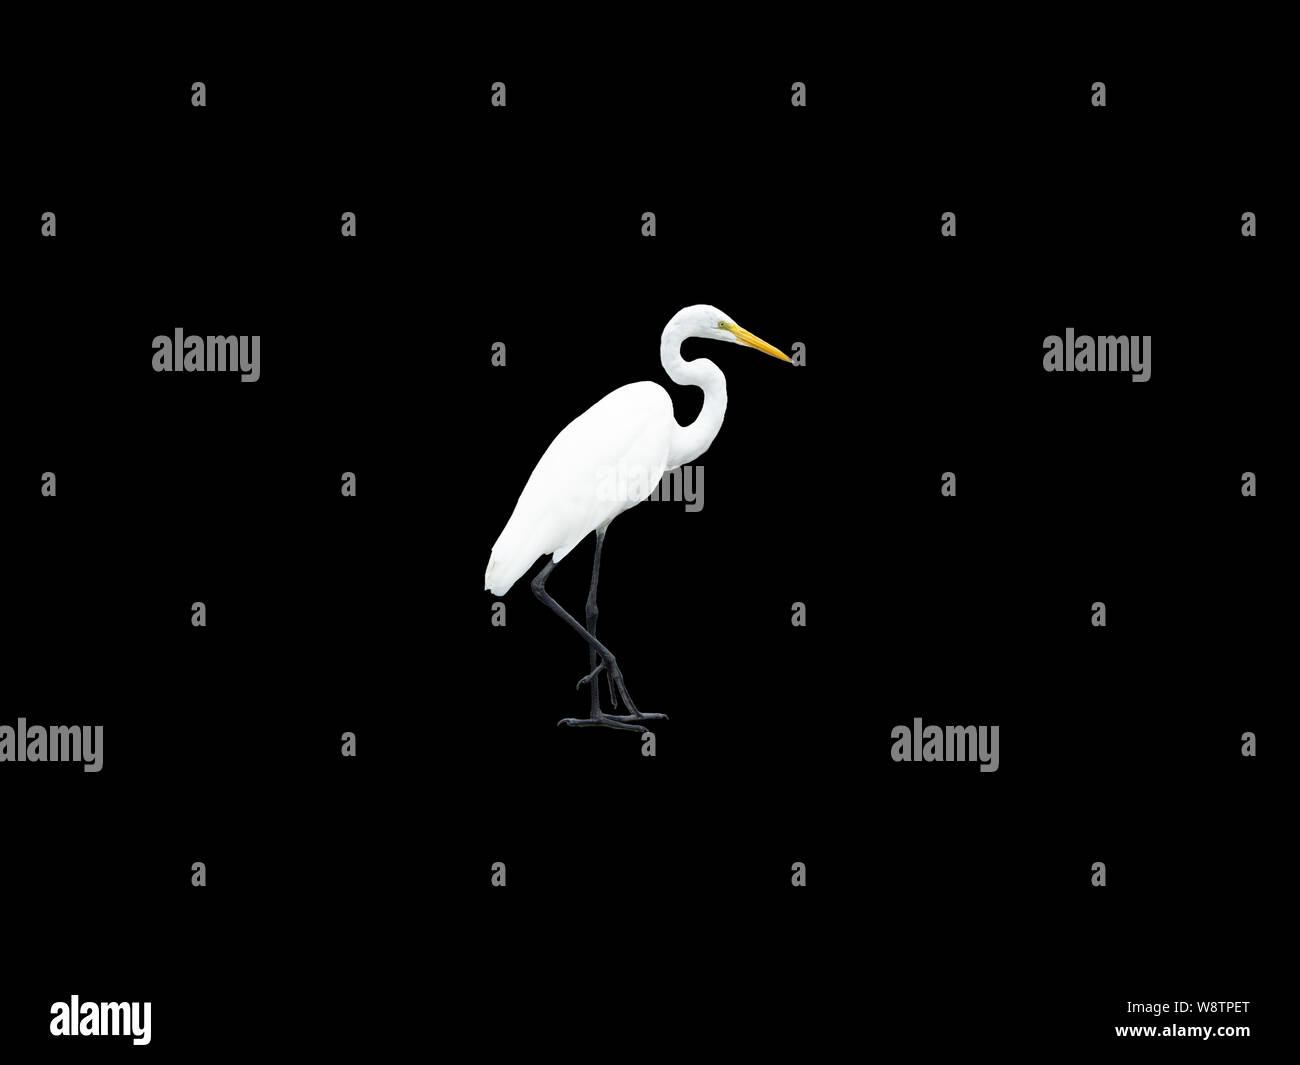 Adult snowy egret cut out on a black background with one foot lifted Stock Photo